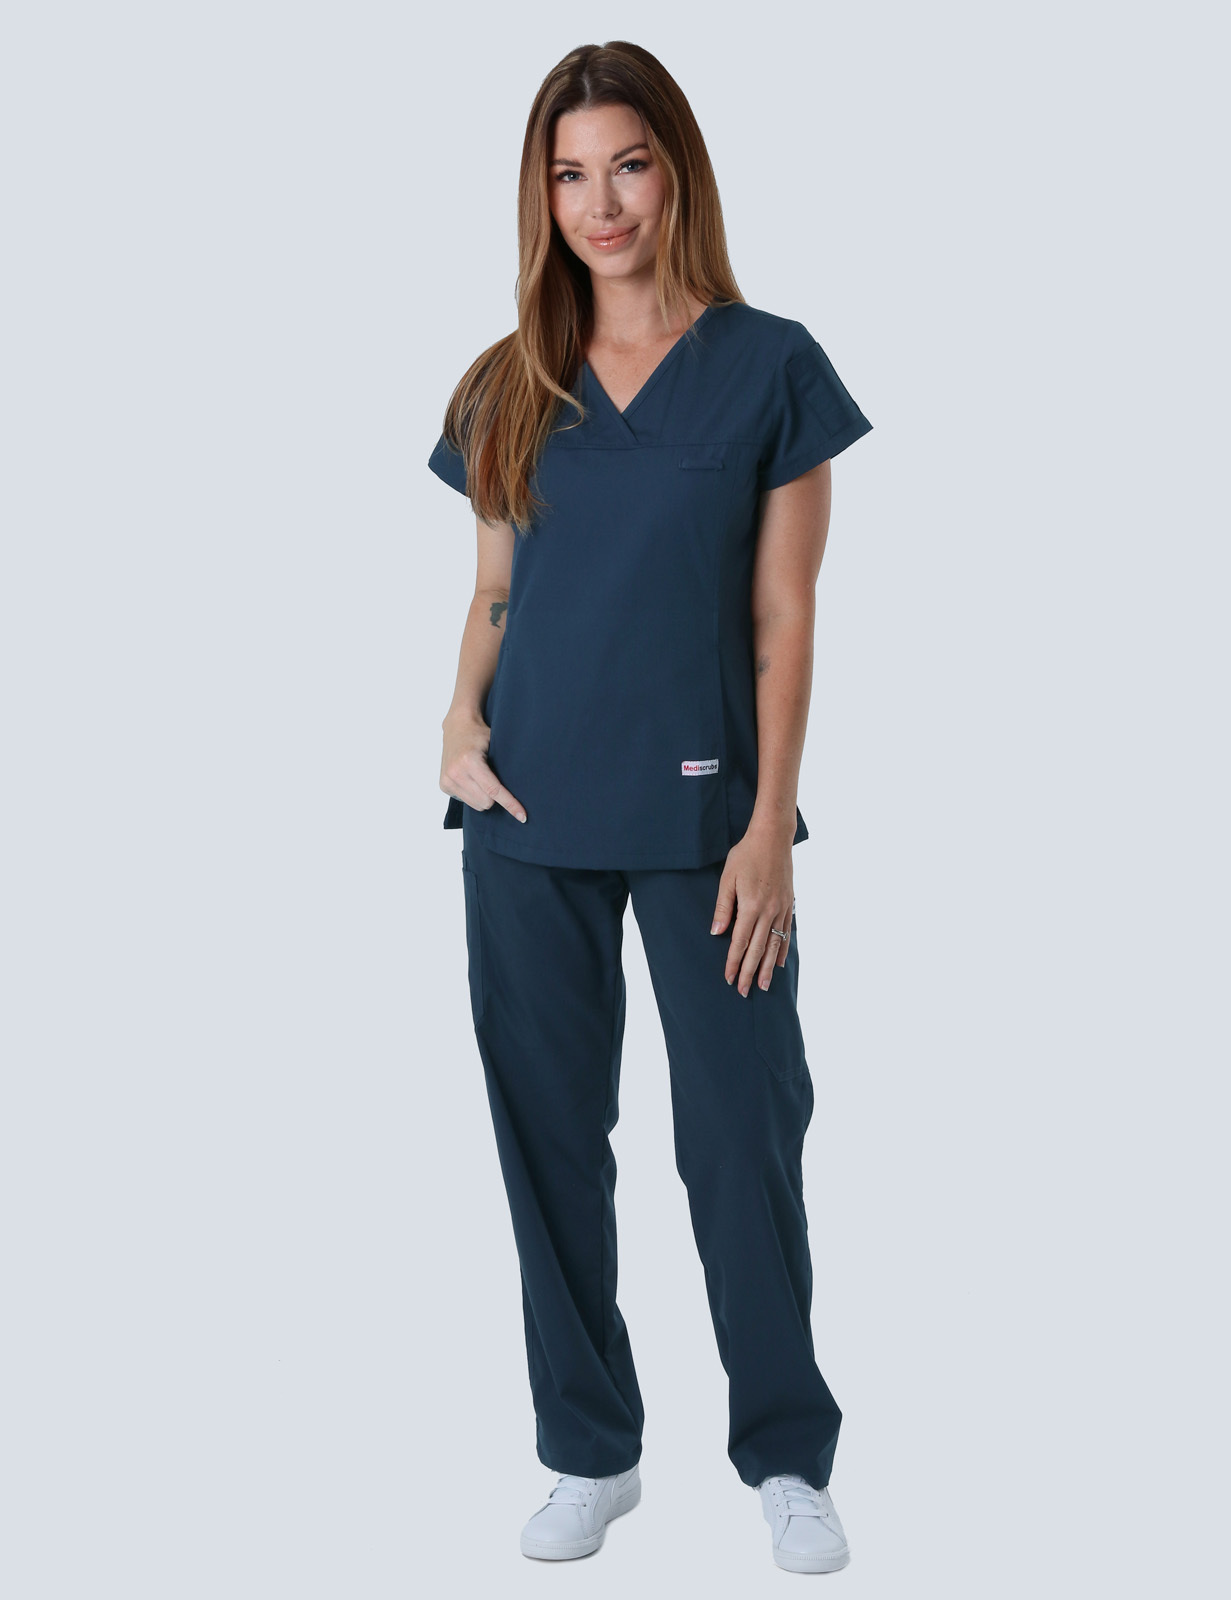 Women's Fit Solid Scrub Top - Navy - 5X Large